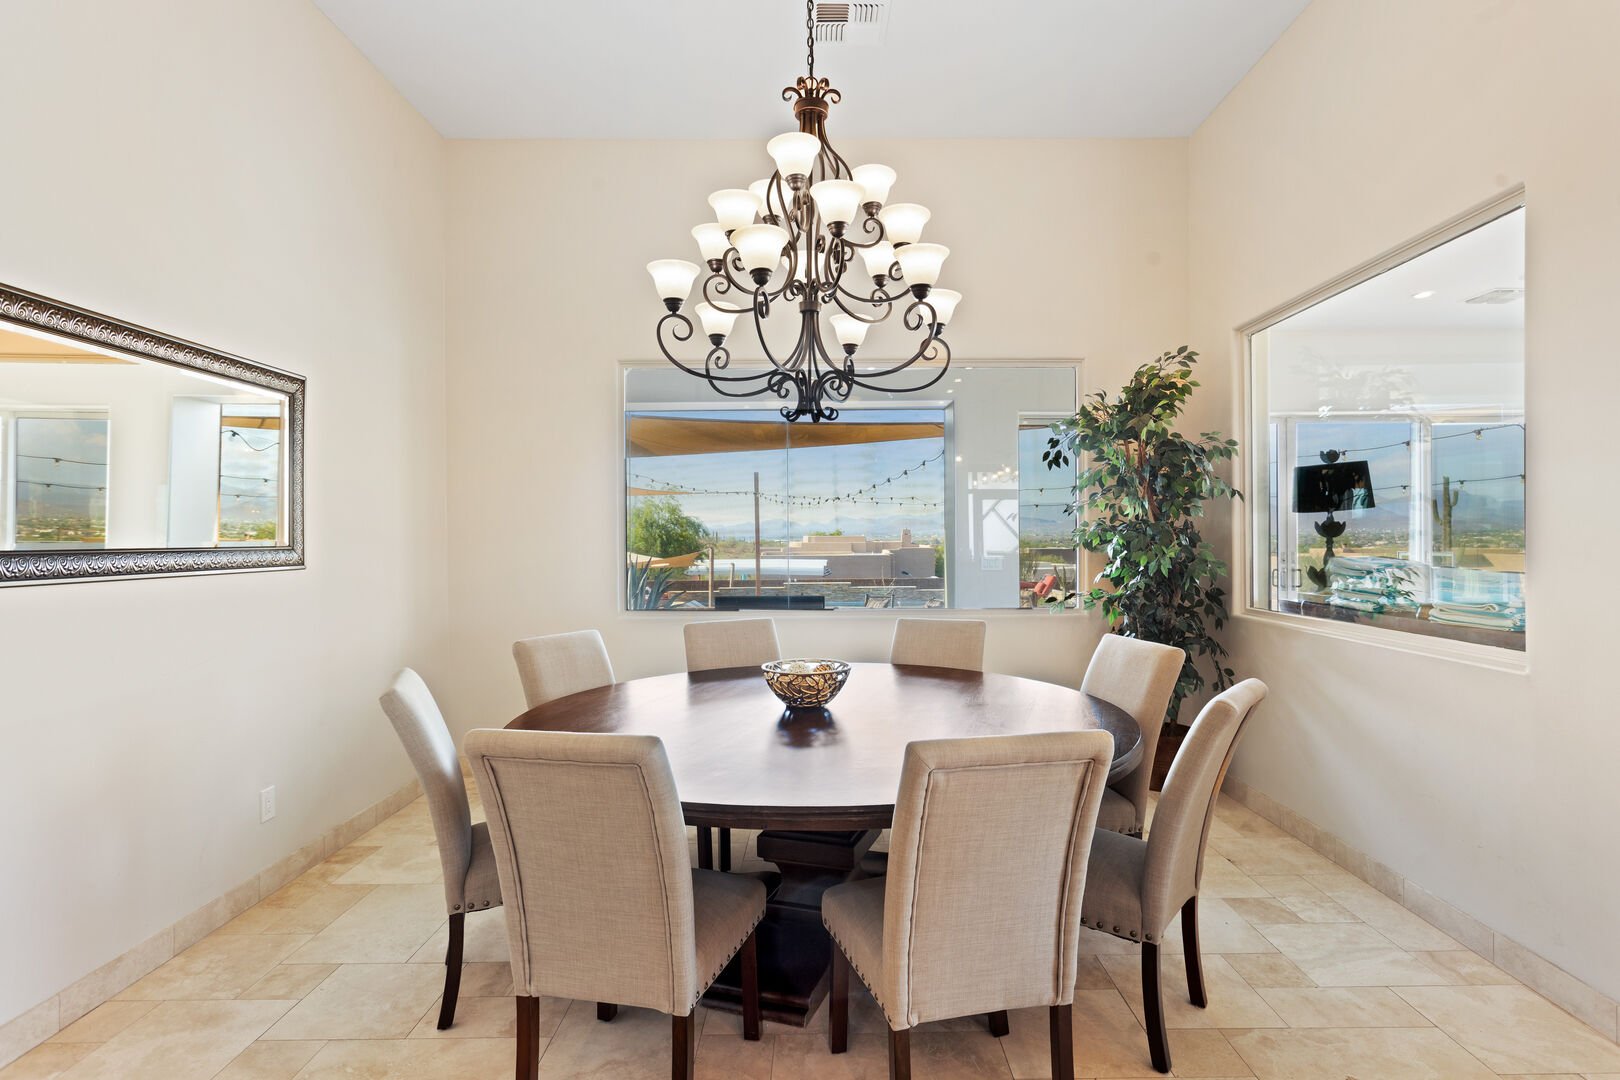 Formal Dining Area w/ Seating for 8 + 10 at Kitchen Island